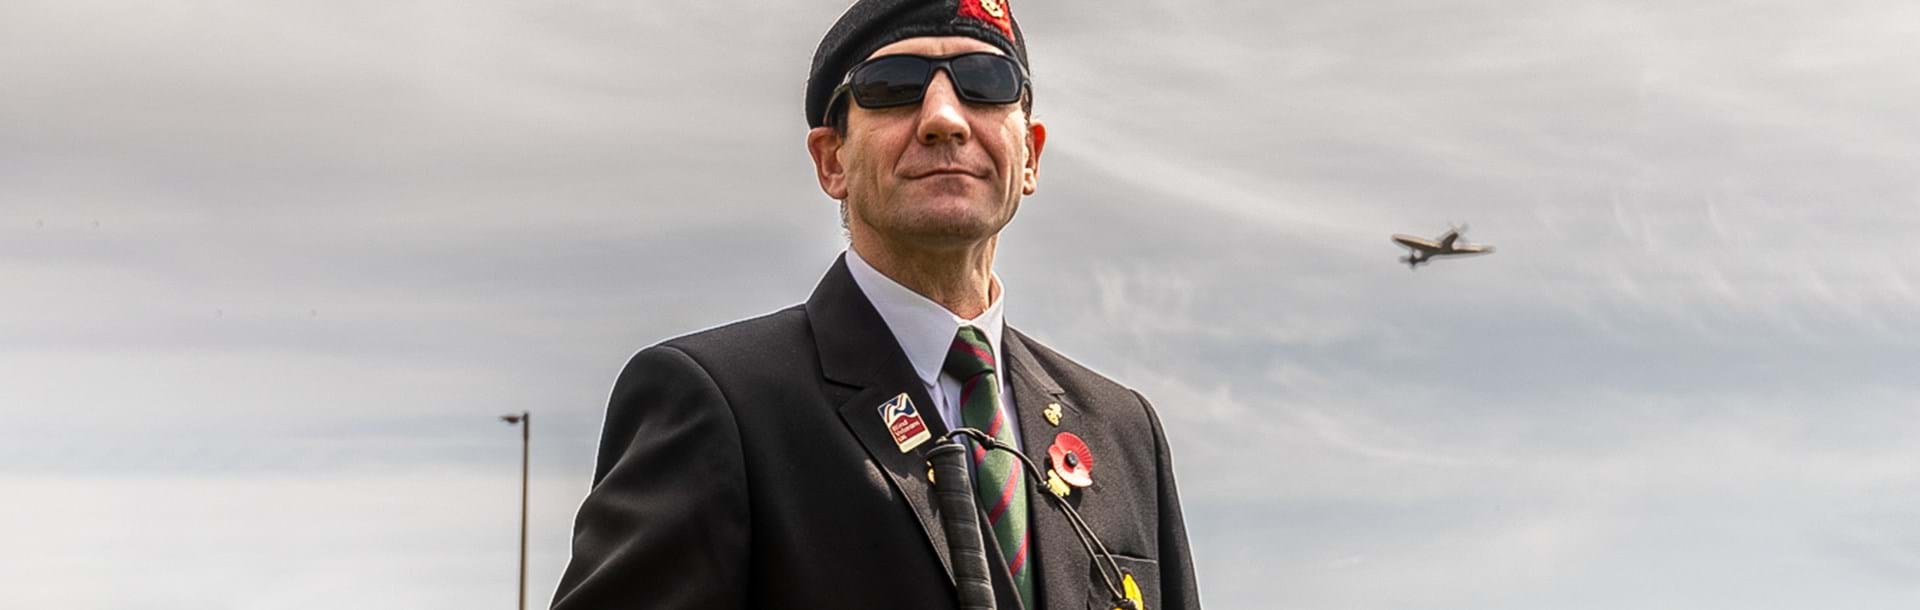 A photo of Charlie Parker, Kingsman in the First Battalion King’s Infantry Regiment and a member of Blind Veterans UK comes out  to take part in the VE day celebrations having been in lockdown, as a Spitfire flies over Blind Veterans UK, Ovingdean, East Sussex, UK